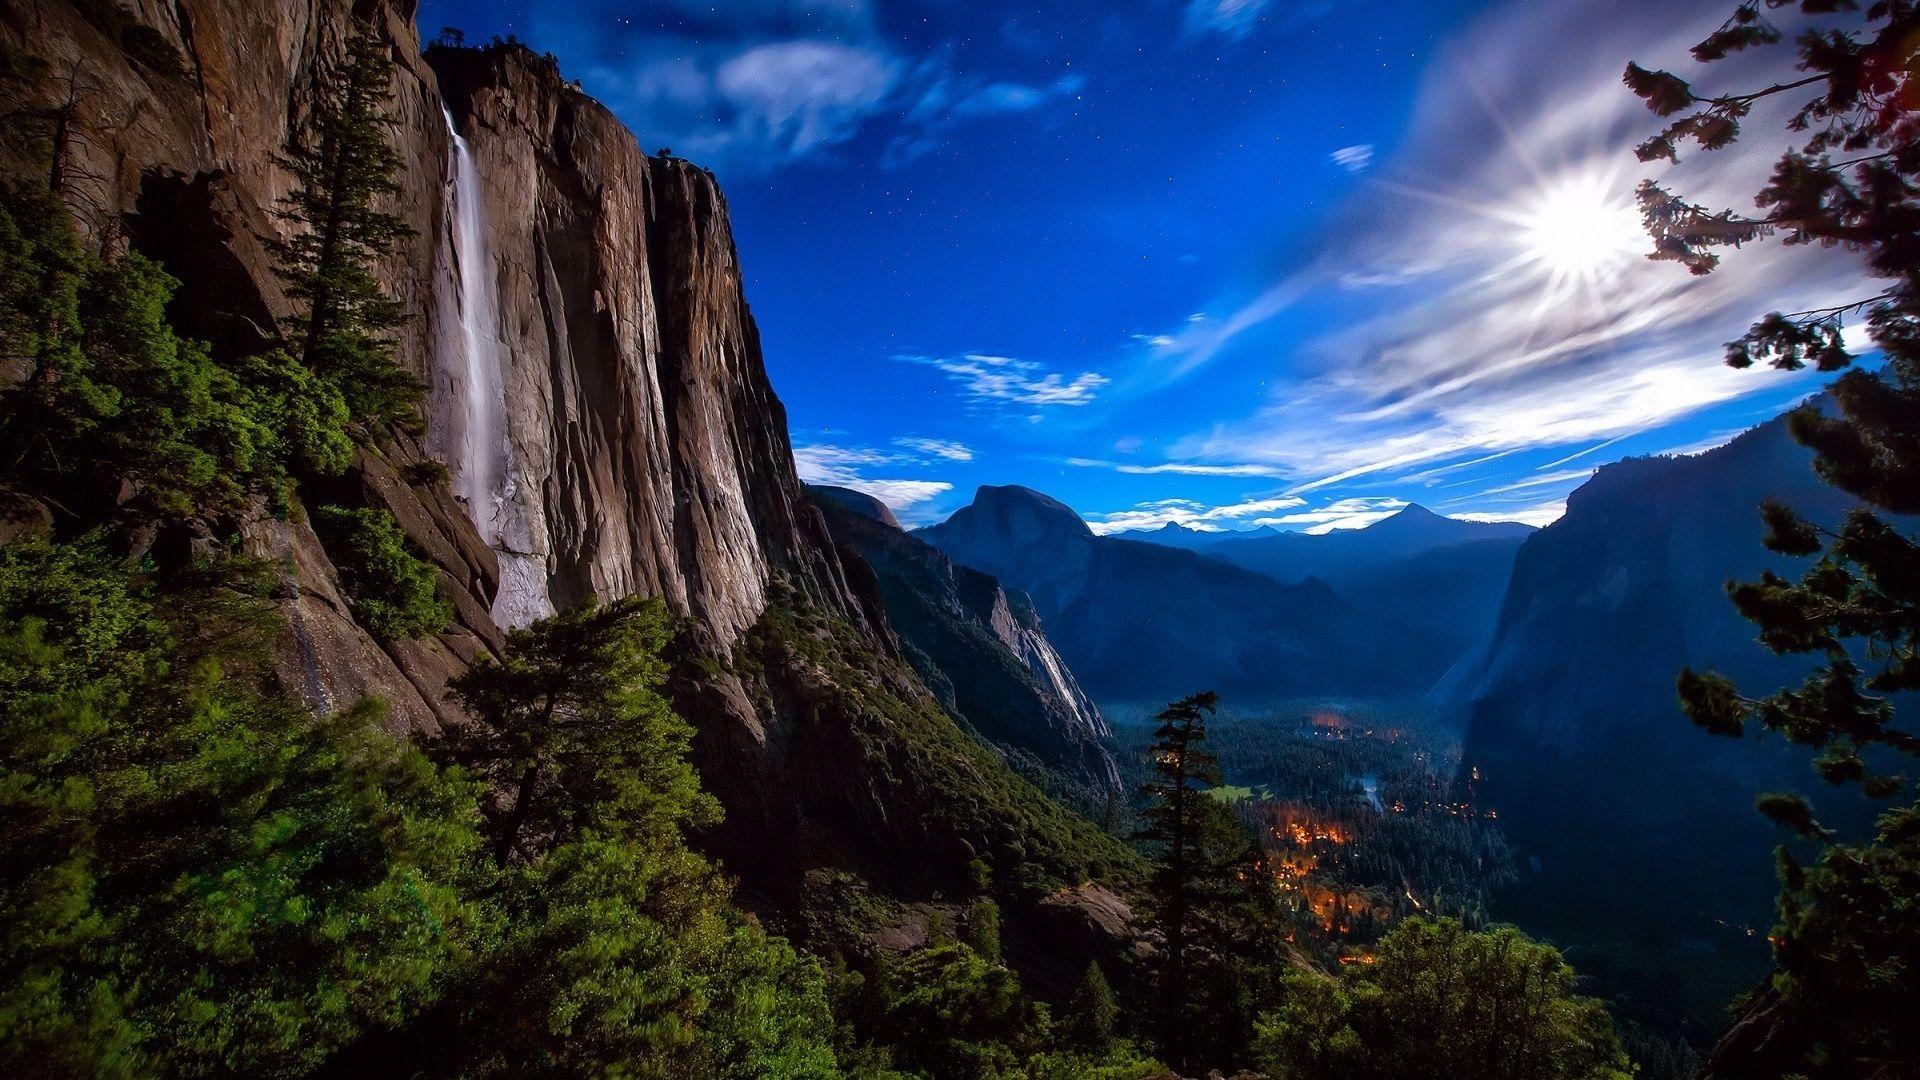 Yosemite 1080p Wallpaper Widescreen High Quality For Mobile HD